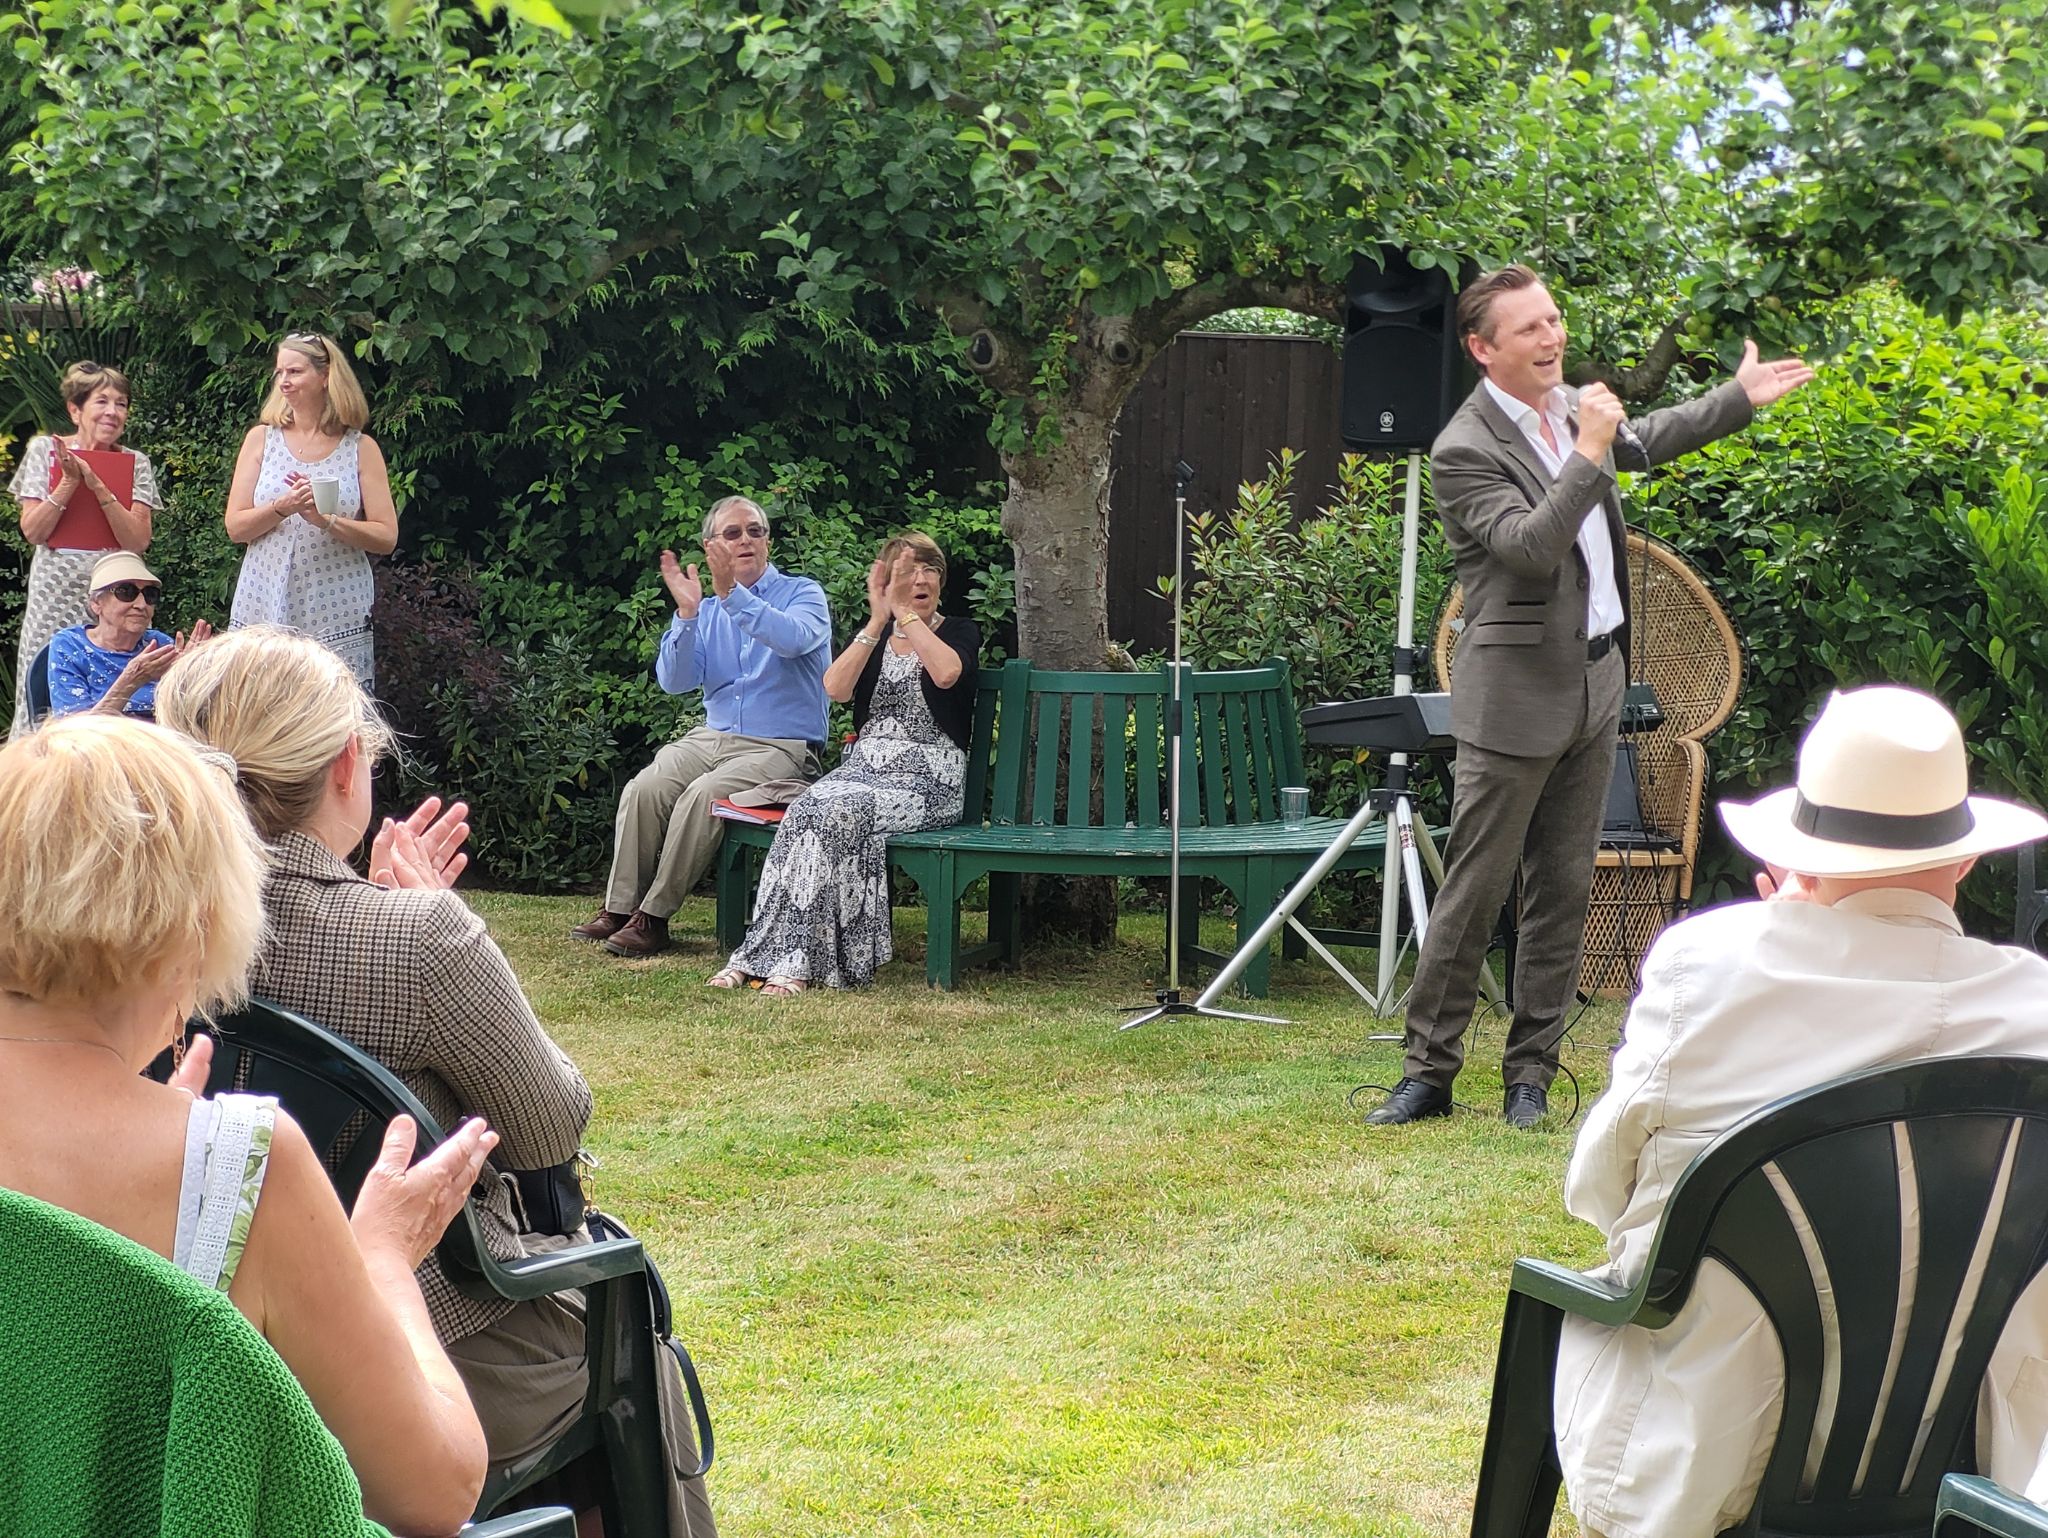 Georg Tormann singing at the Music in the garden event